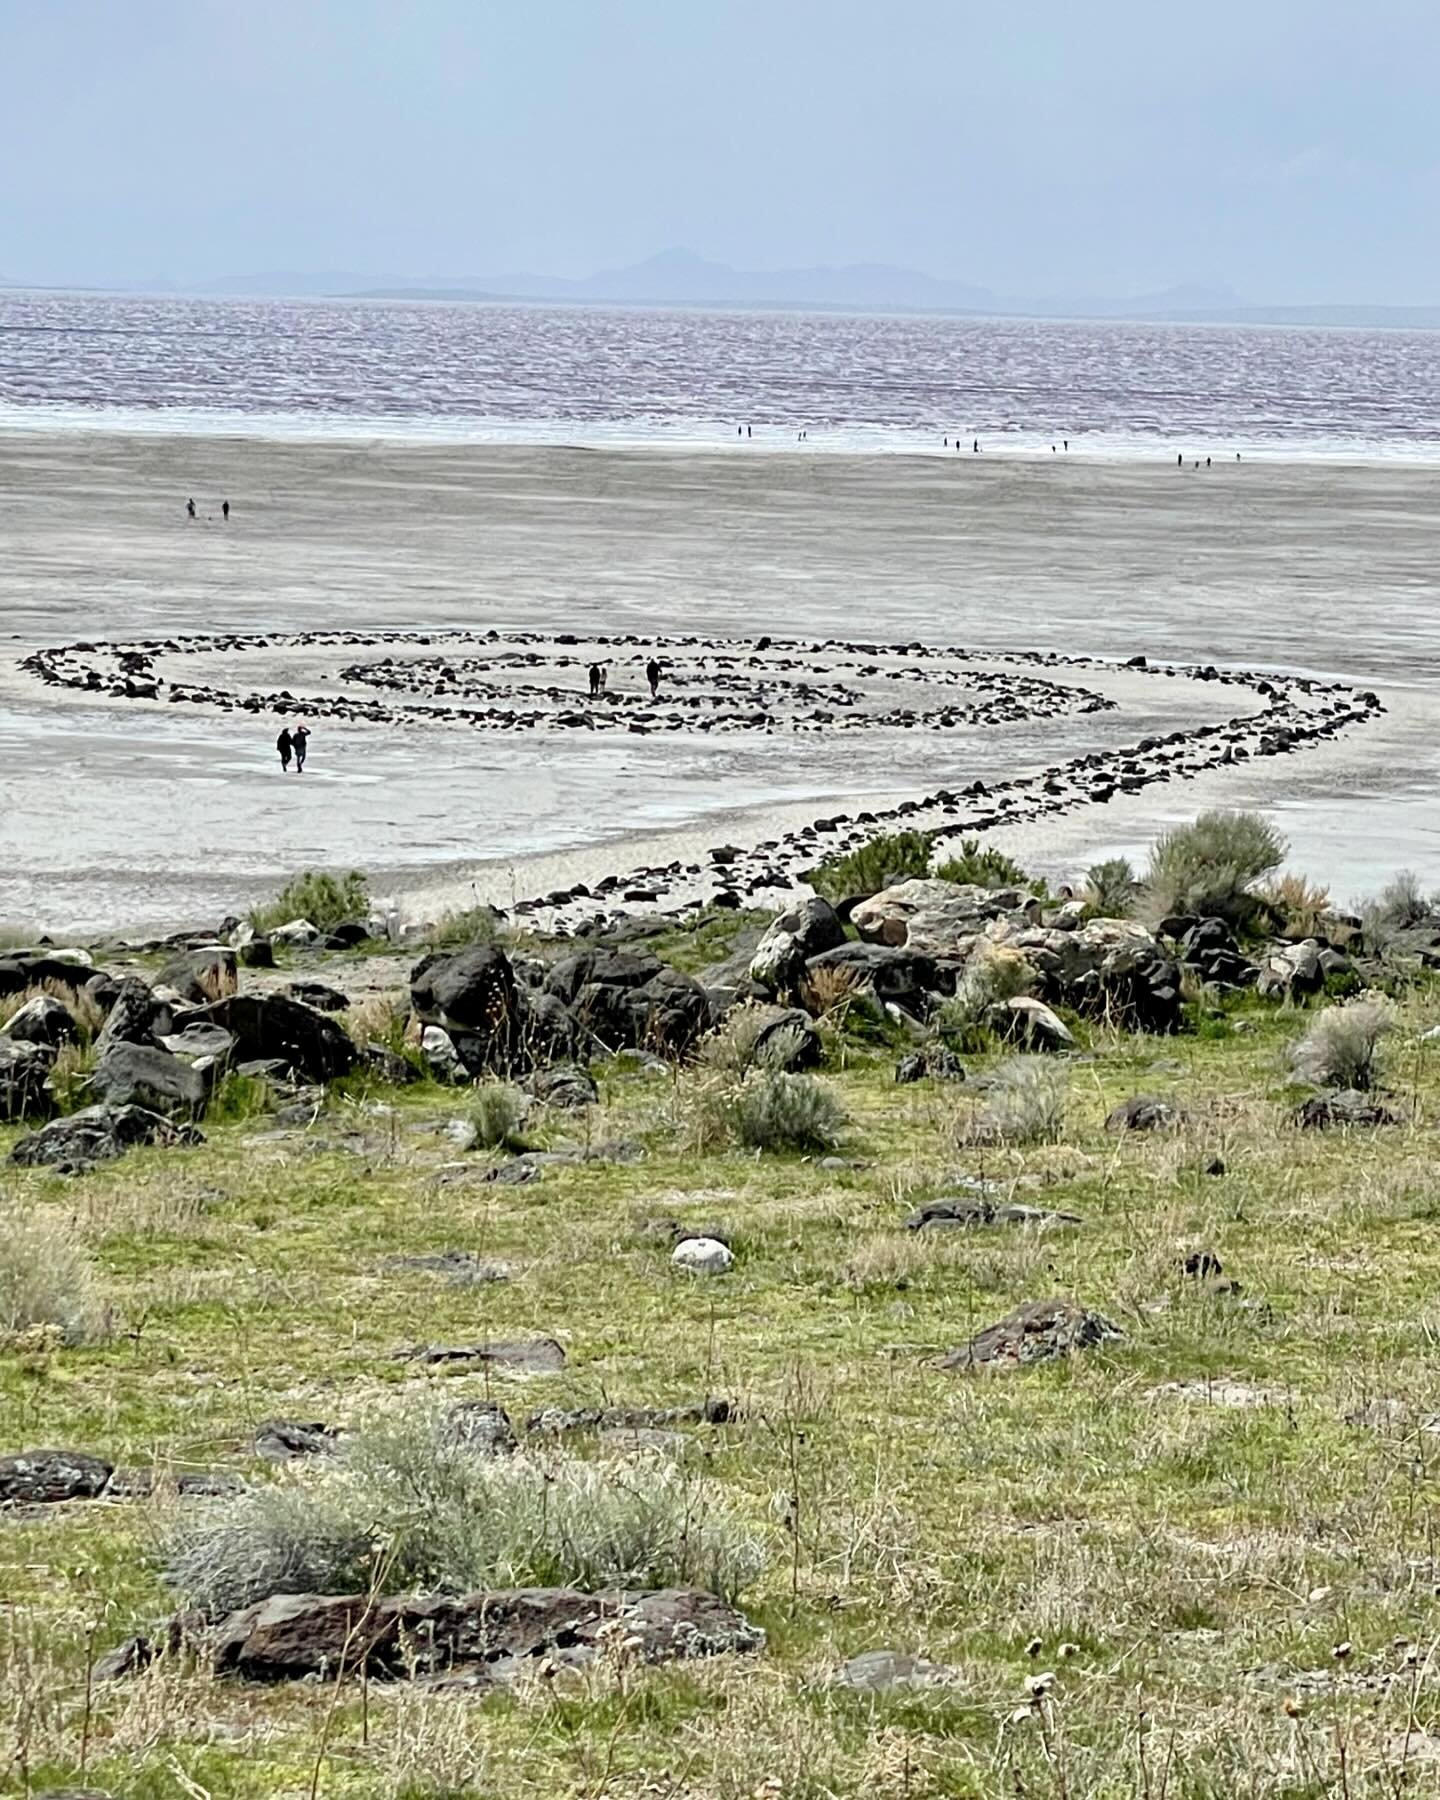 Spiral Jetty, Robert Smithson. Sun Tunnels, Nancy Holt. Part of the space, scale pilgrimage. So happy to have this time. 
&bull;
&bull;
@holtsmithsonfoundation  #landart